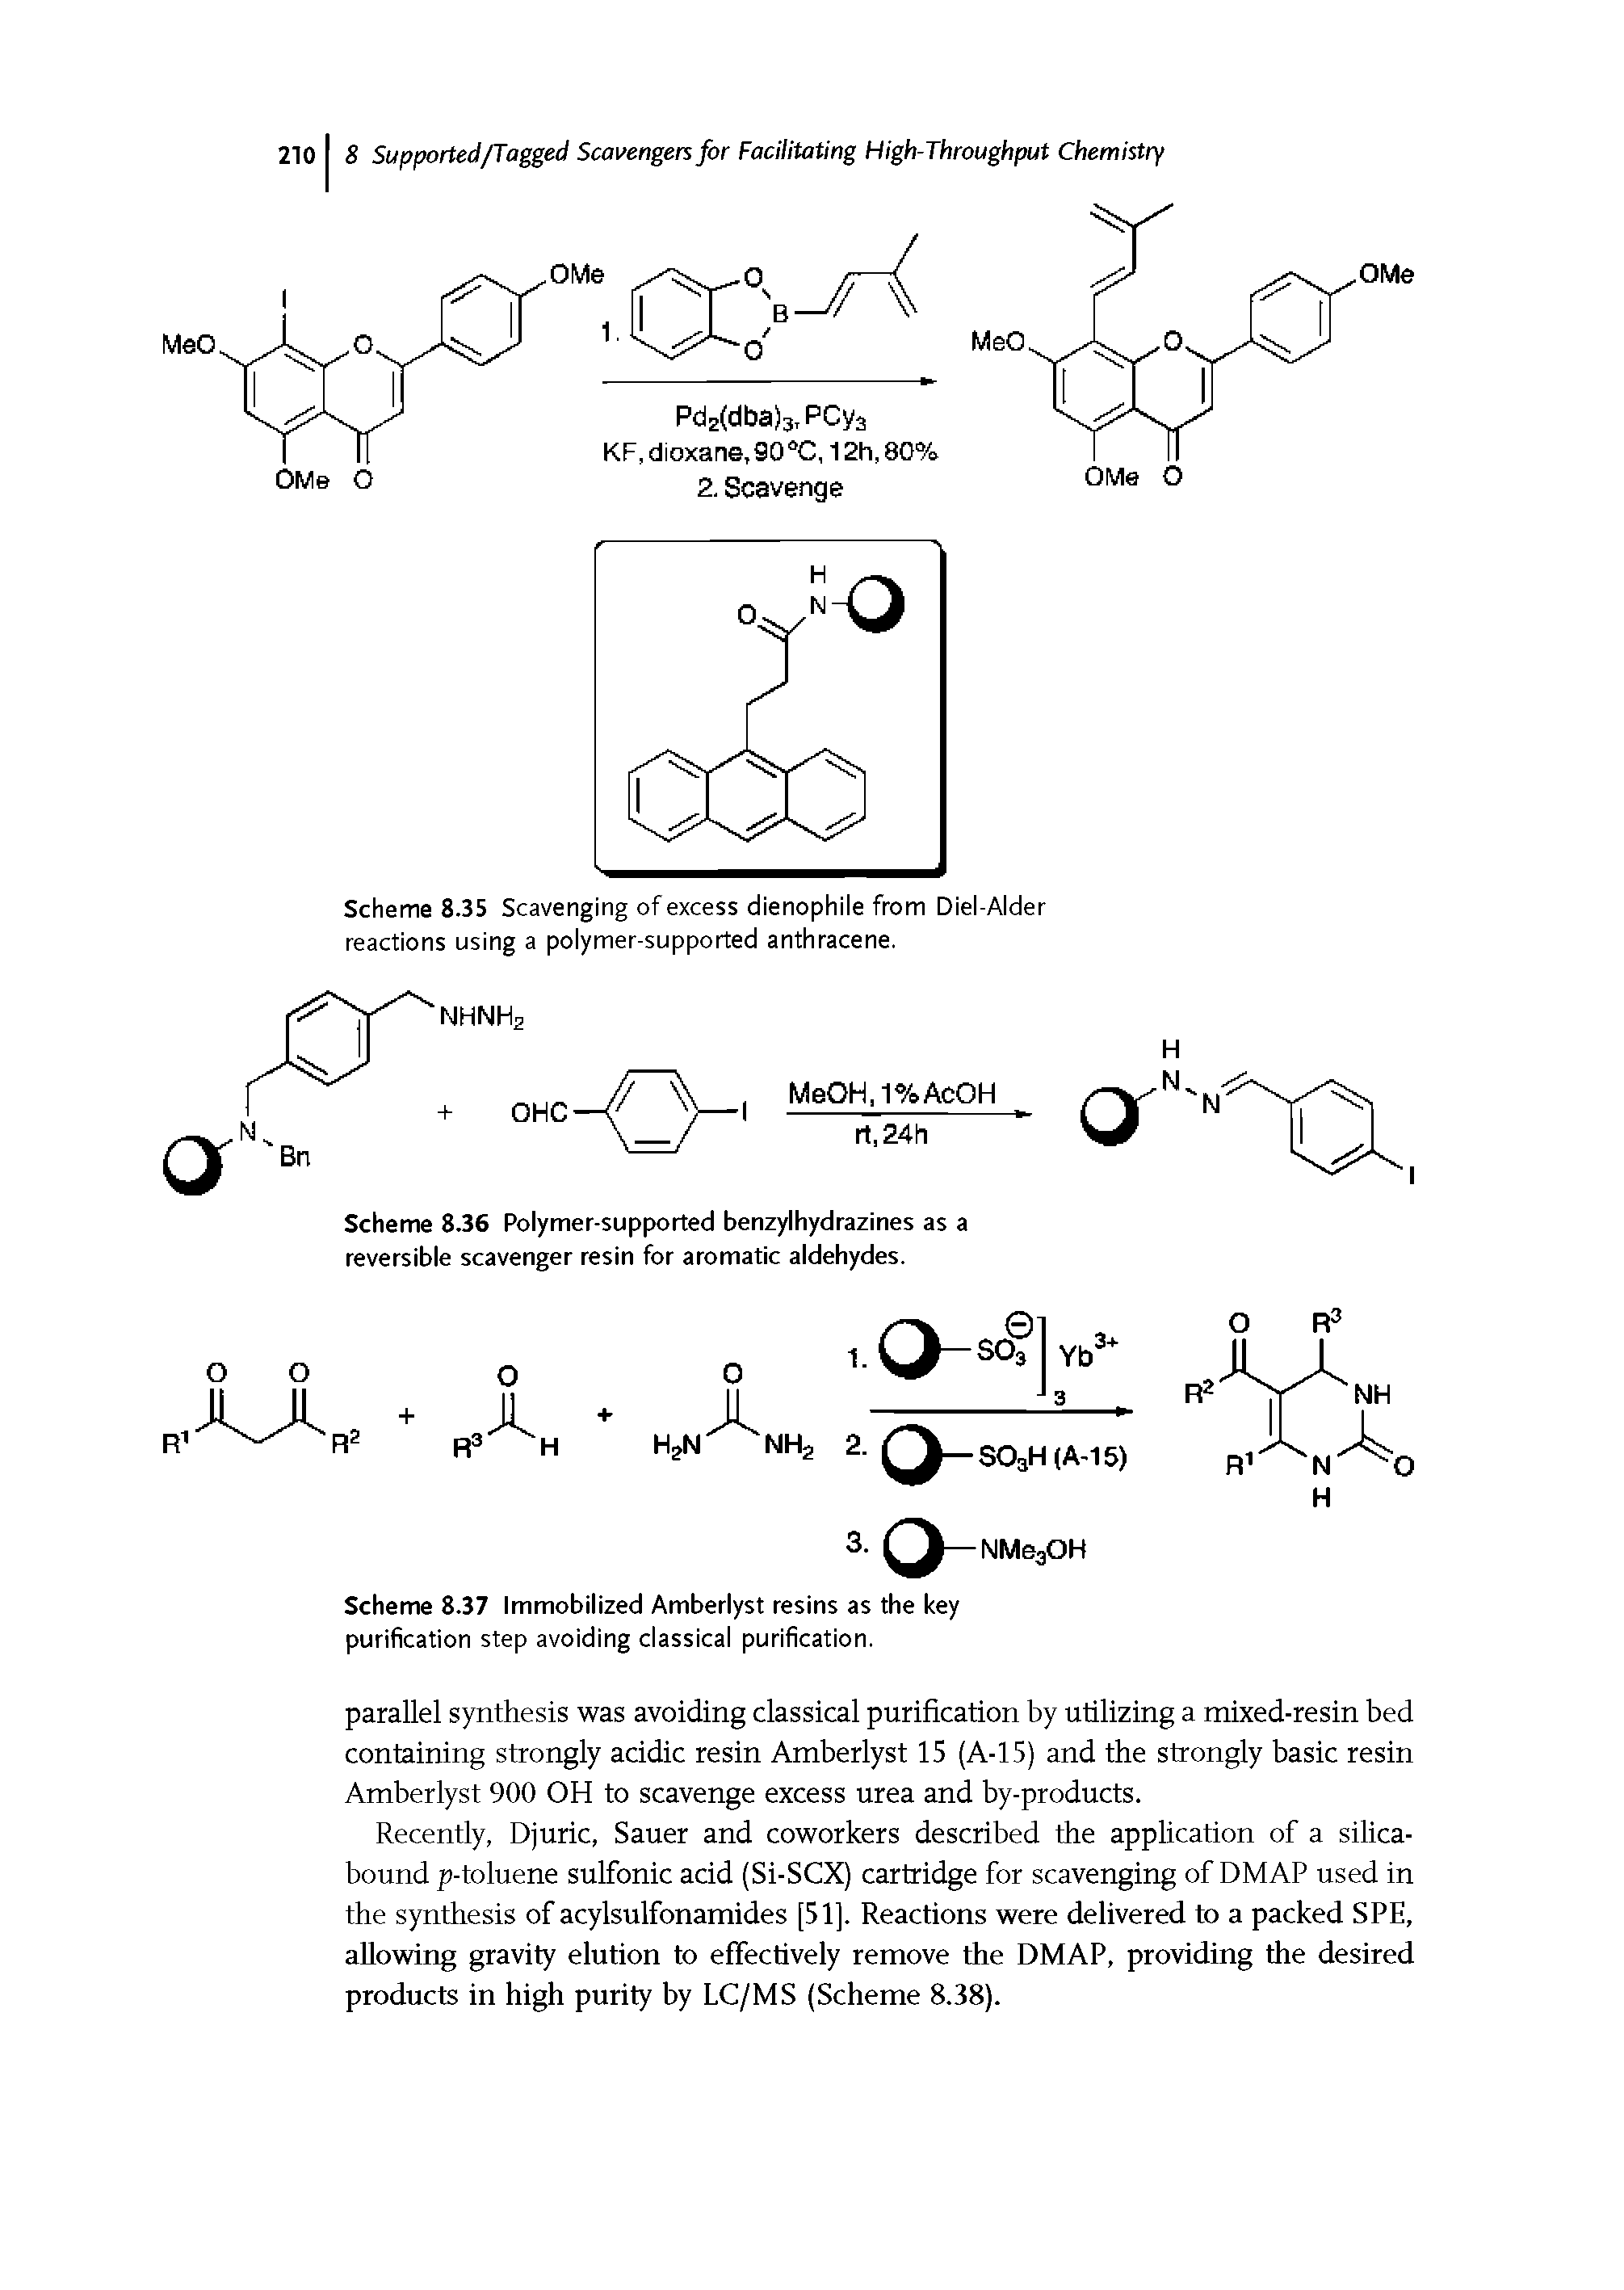 Scheme 8.35 Scavenging of excess dienophile from Diel-Alder reactions using a polymer-supported anthracene.